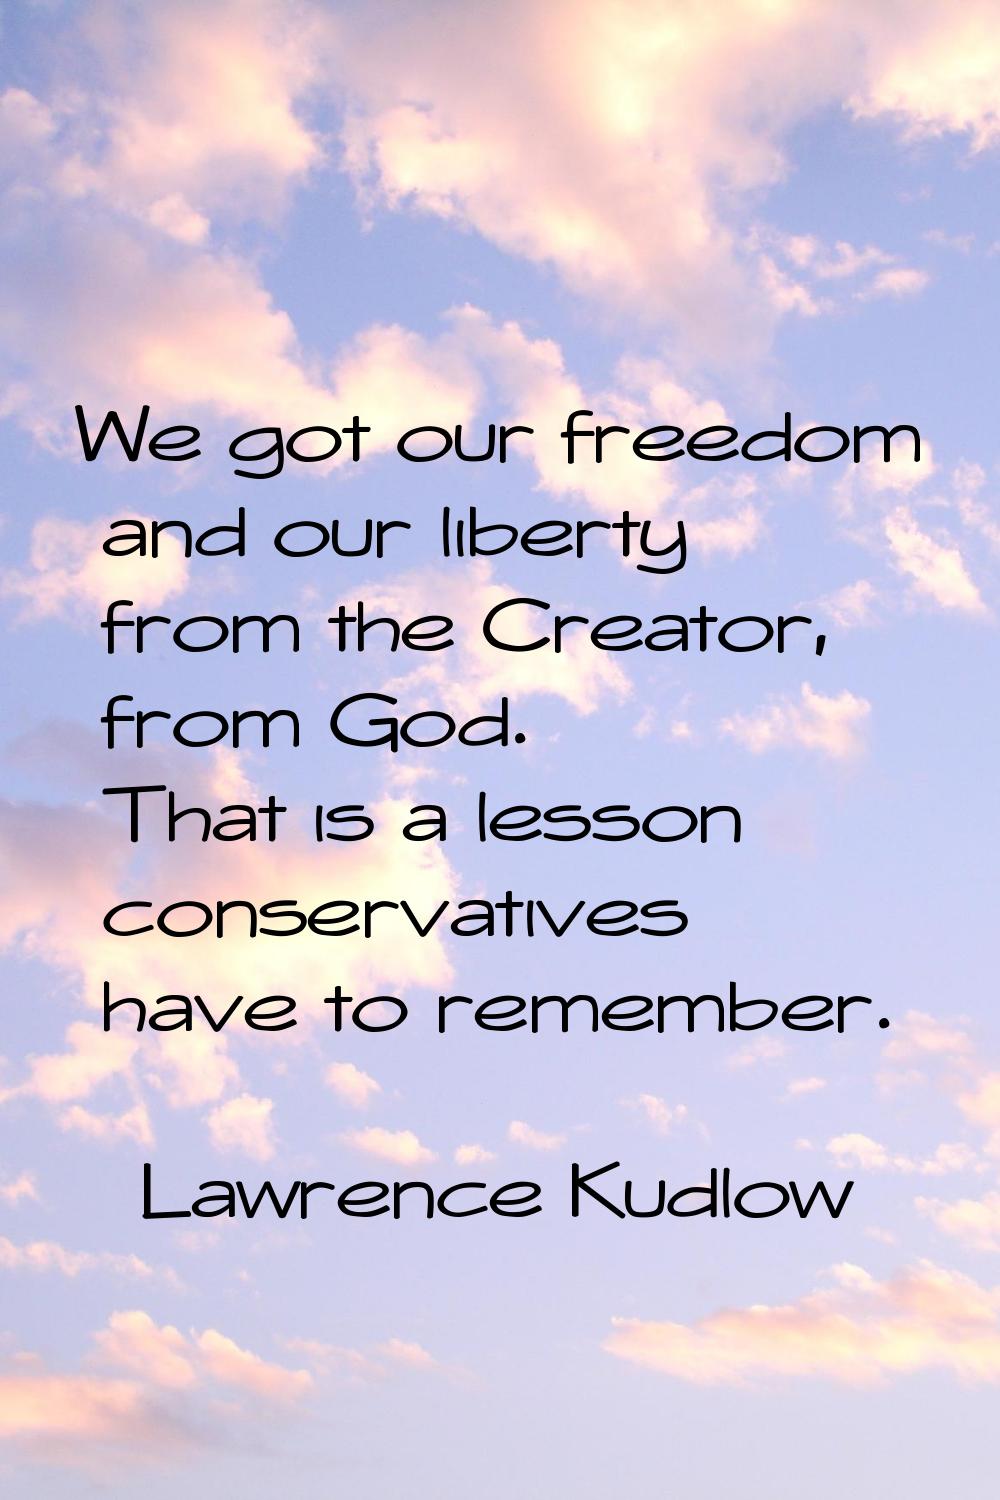 We got our freedom and our liberty from the Creator, from God. That is a lesson conservatives have 